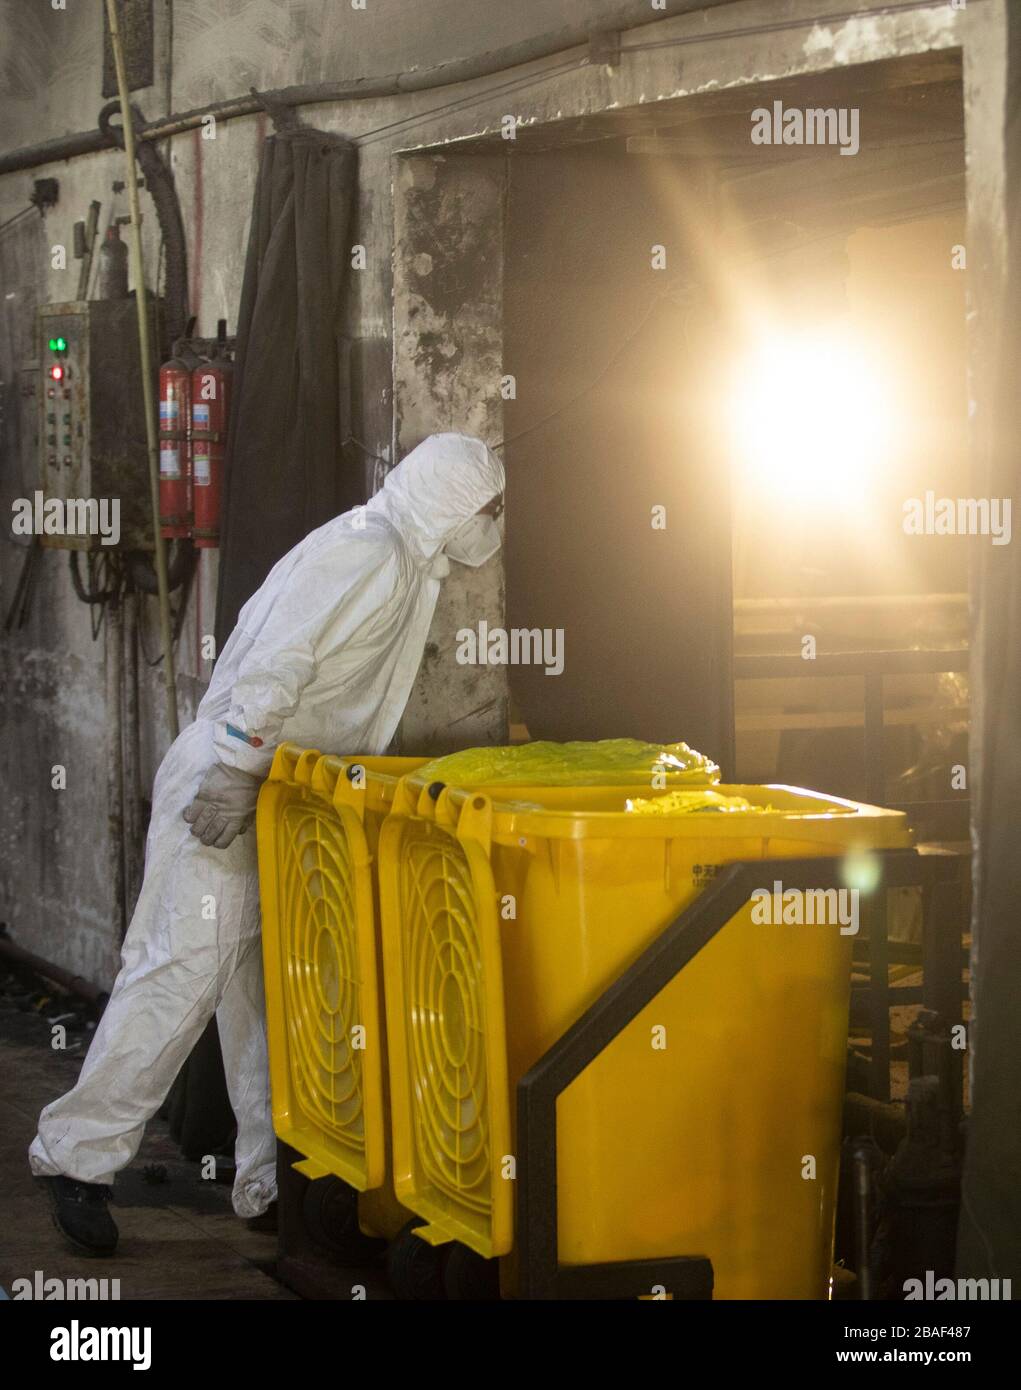 (200327) -- WUHAN, March 27, 2020 (Xinhua) -- Wang Peng works at a medical waste treatment company in Wuhan, central China's Hubei Province, March 26, 2020. Wang Peng, 35, has been working for the Wuhan Hanshi Environmental Engineering Company for 9 years, where he is responsible for the disposal and incineration of medical waste.Protection against infection is a major challenge that Wang and his coworkers face, as they work 12-hour shifts to cope with the surging workload during the COVID-19 outbreak. 'I like what I'm doing,' Wang said, 'I'm not only making money for my family, but also makin Stock Photo